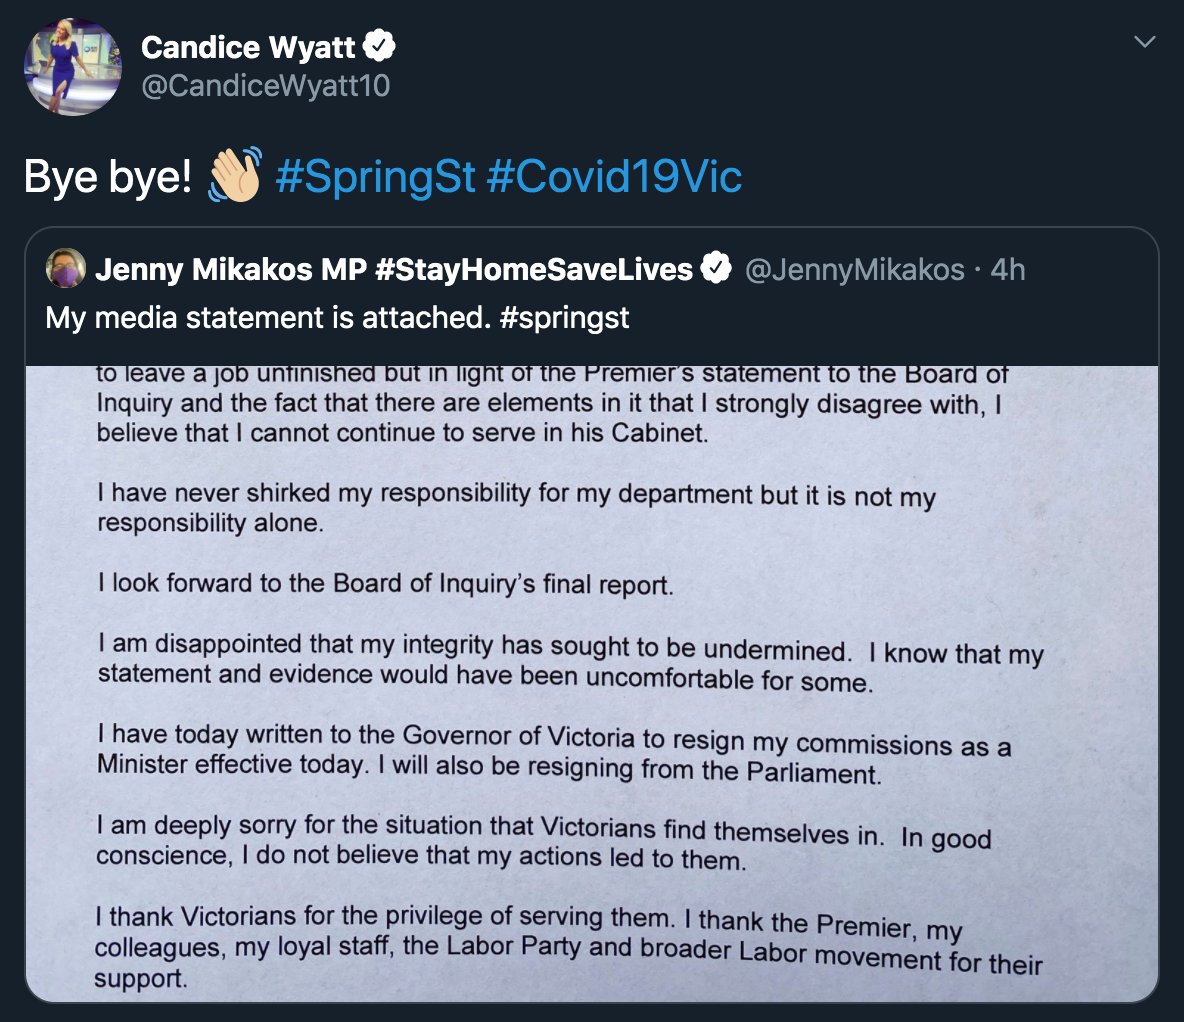 Back to Jenny Mikakos - remember this victory lap by  @CandiceWyatt10? To Candice's credit, she deleted it, but it was a poignant reminder that news is harsh and partisan across the spectrum.